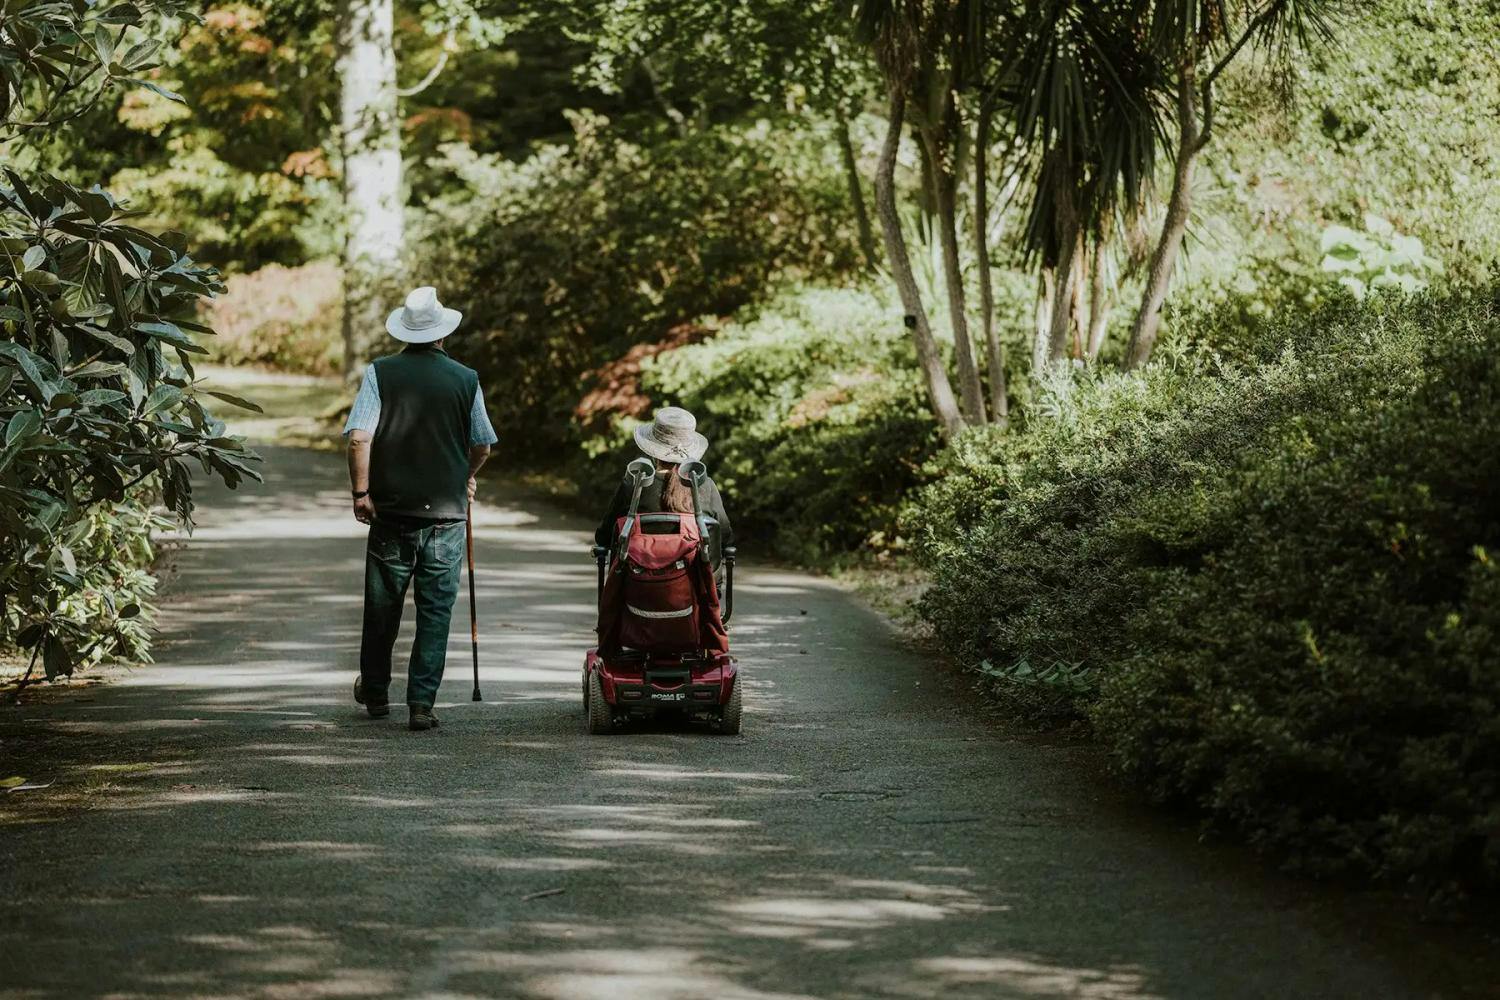 Old couple with cane and mobility scooter in park